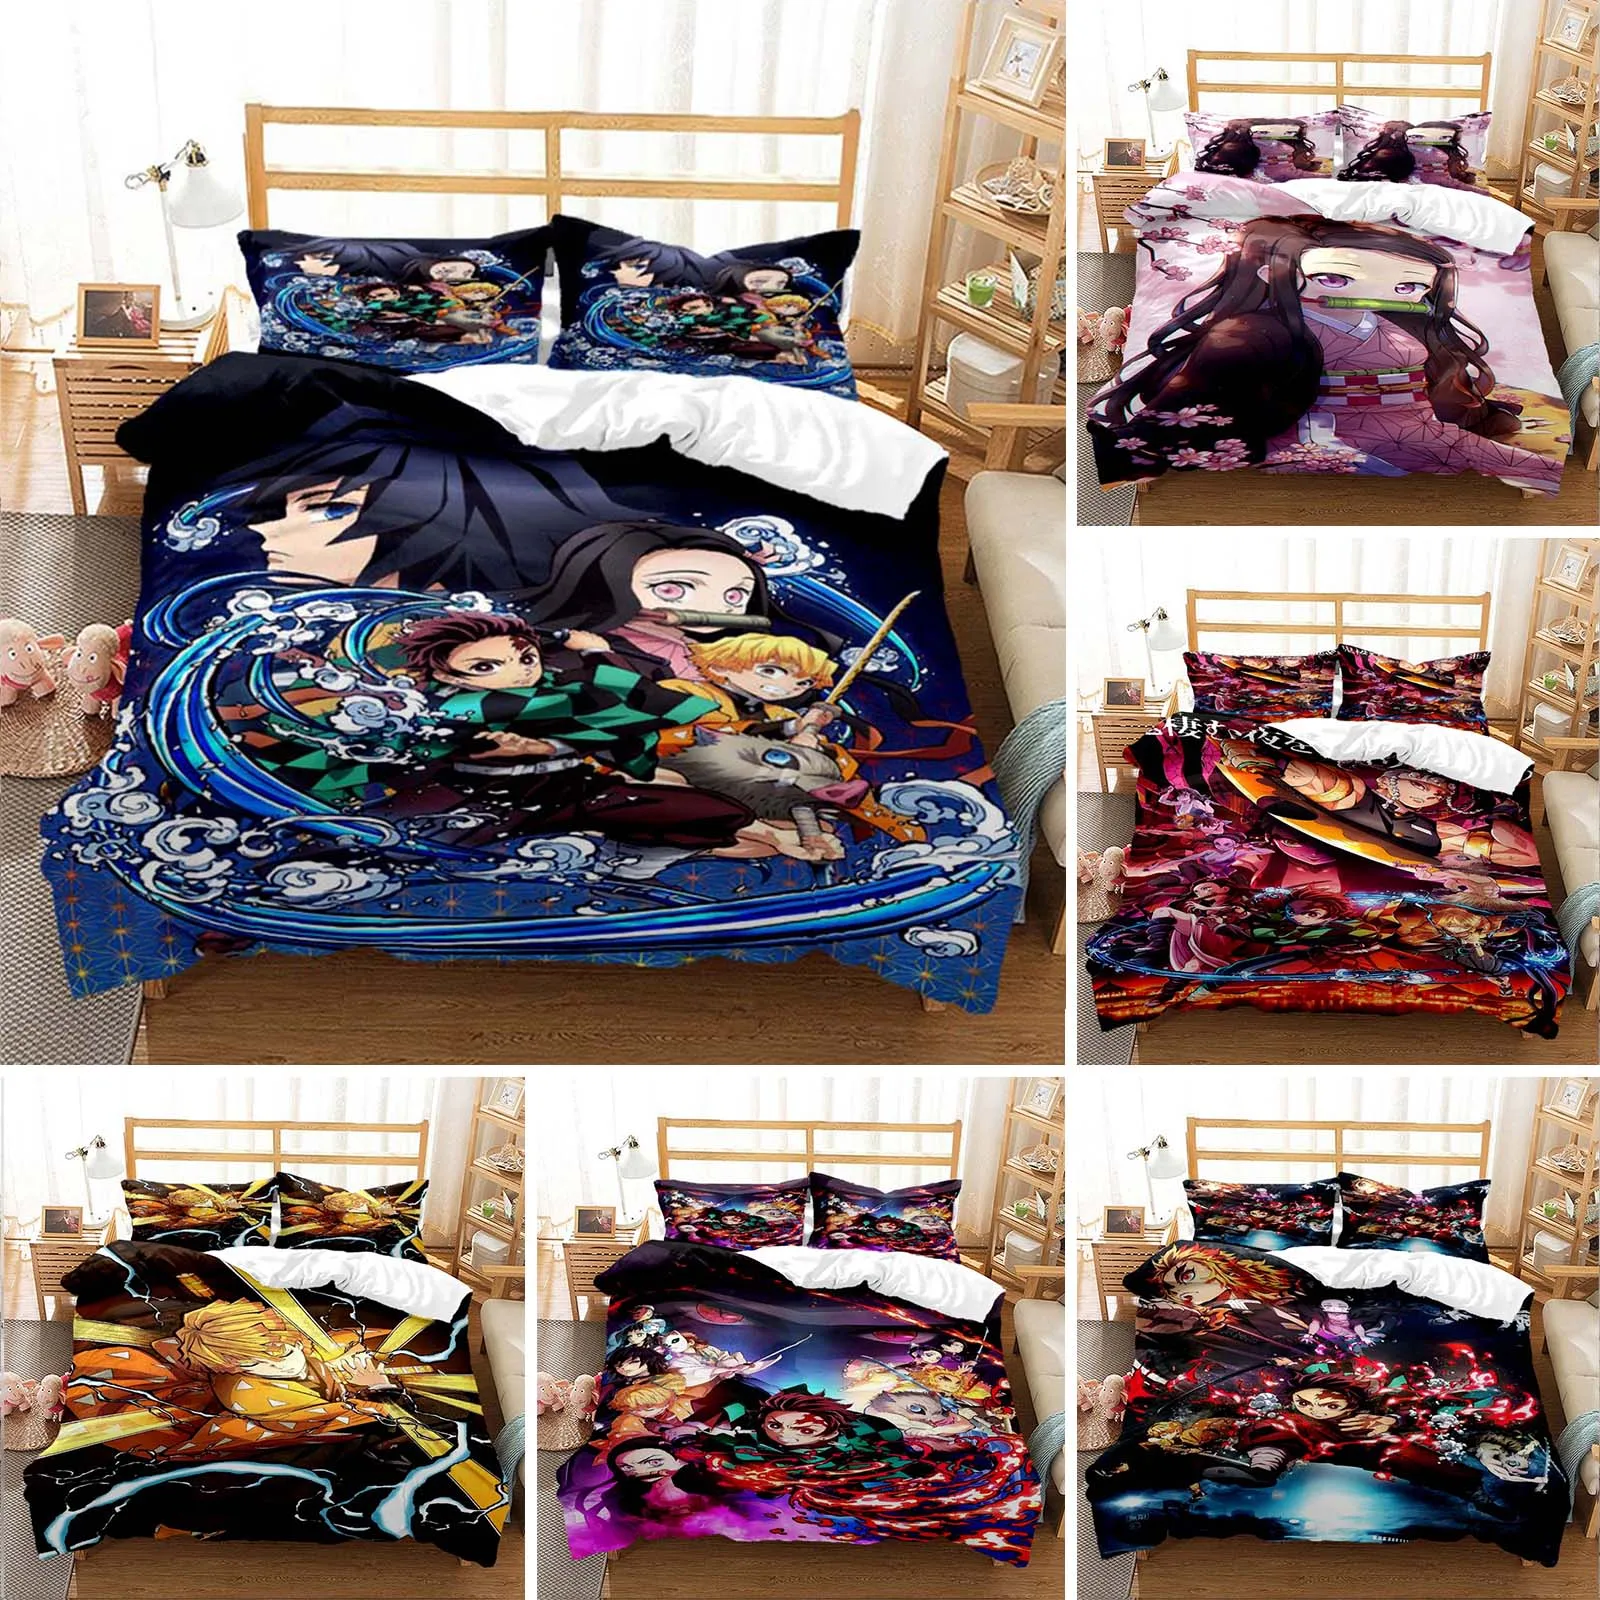 

3D Printed Anime Demon Slayer Duvet Cover Nezuko Tanjirou Bedding Set Double Twin Full Queen King Adult Kids Quilt Cover